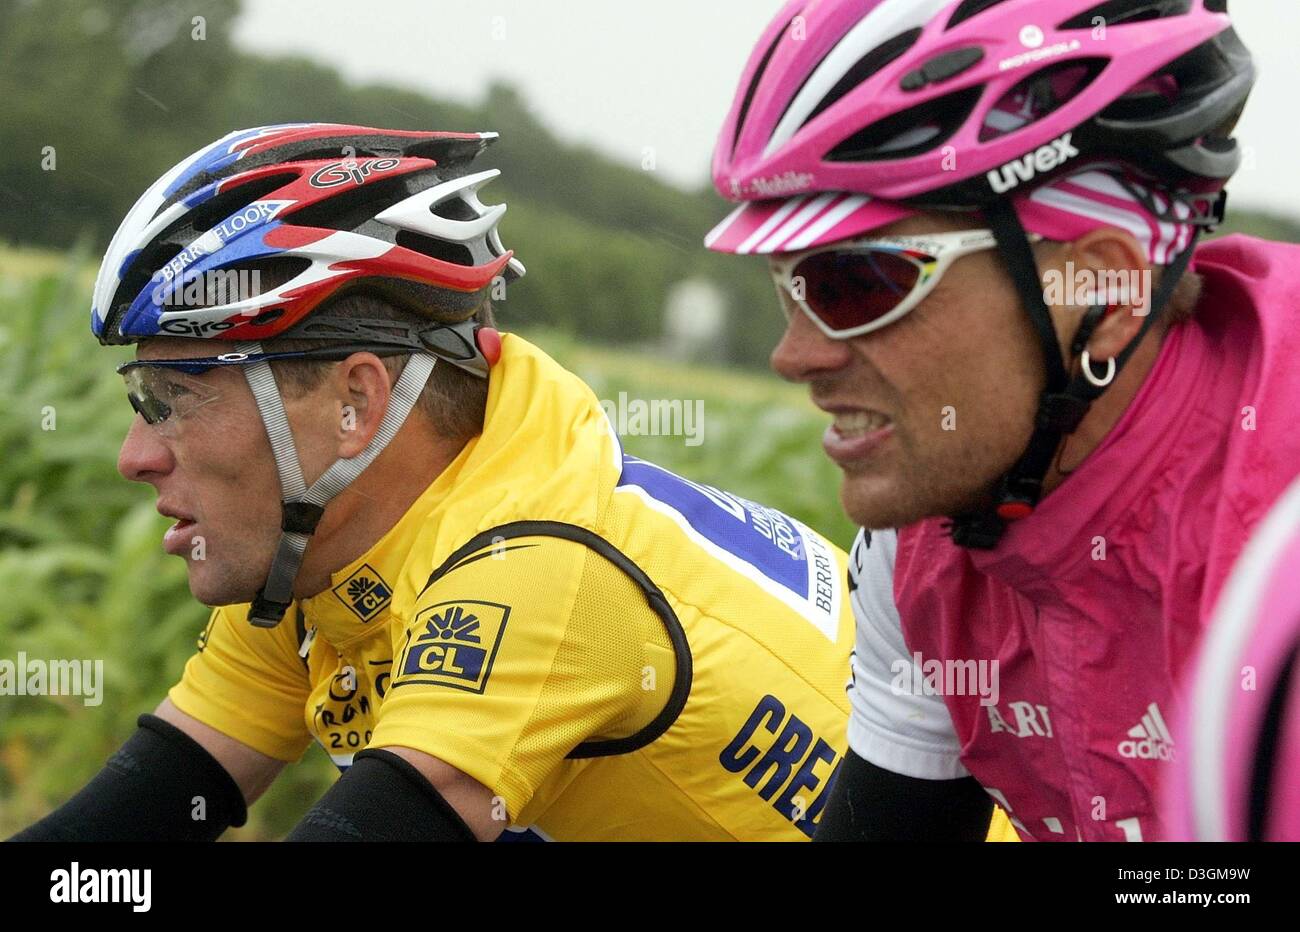 (dpa) - US cyclist Lance Armstrong (L) of team US Postal Services wearing the yellow jersey races head to head with Germany's Jan Ullrich of team T-Mobile early during the 5th stage of the Tour de France cycling race leading from Amiens to Chartres, France, 8 July 2004. Ullrich lags 55 seconds behind in the overall standings. Stock Photo